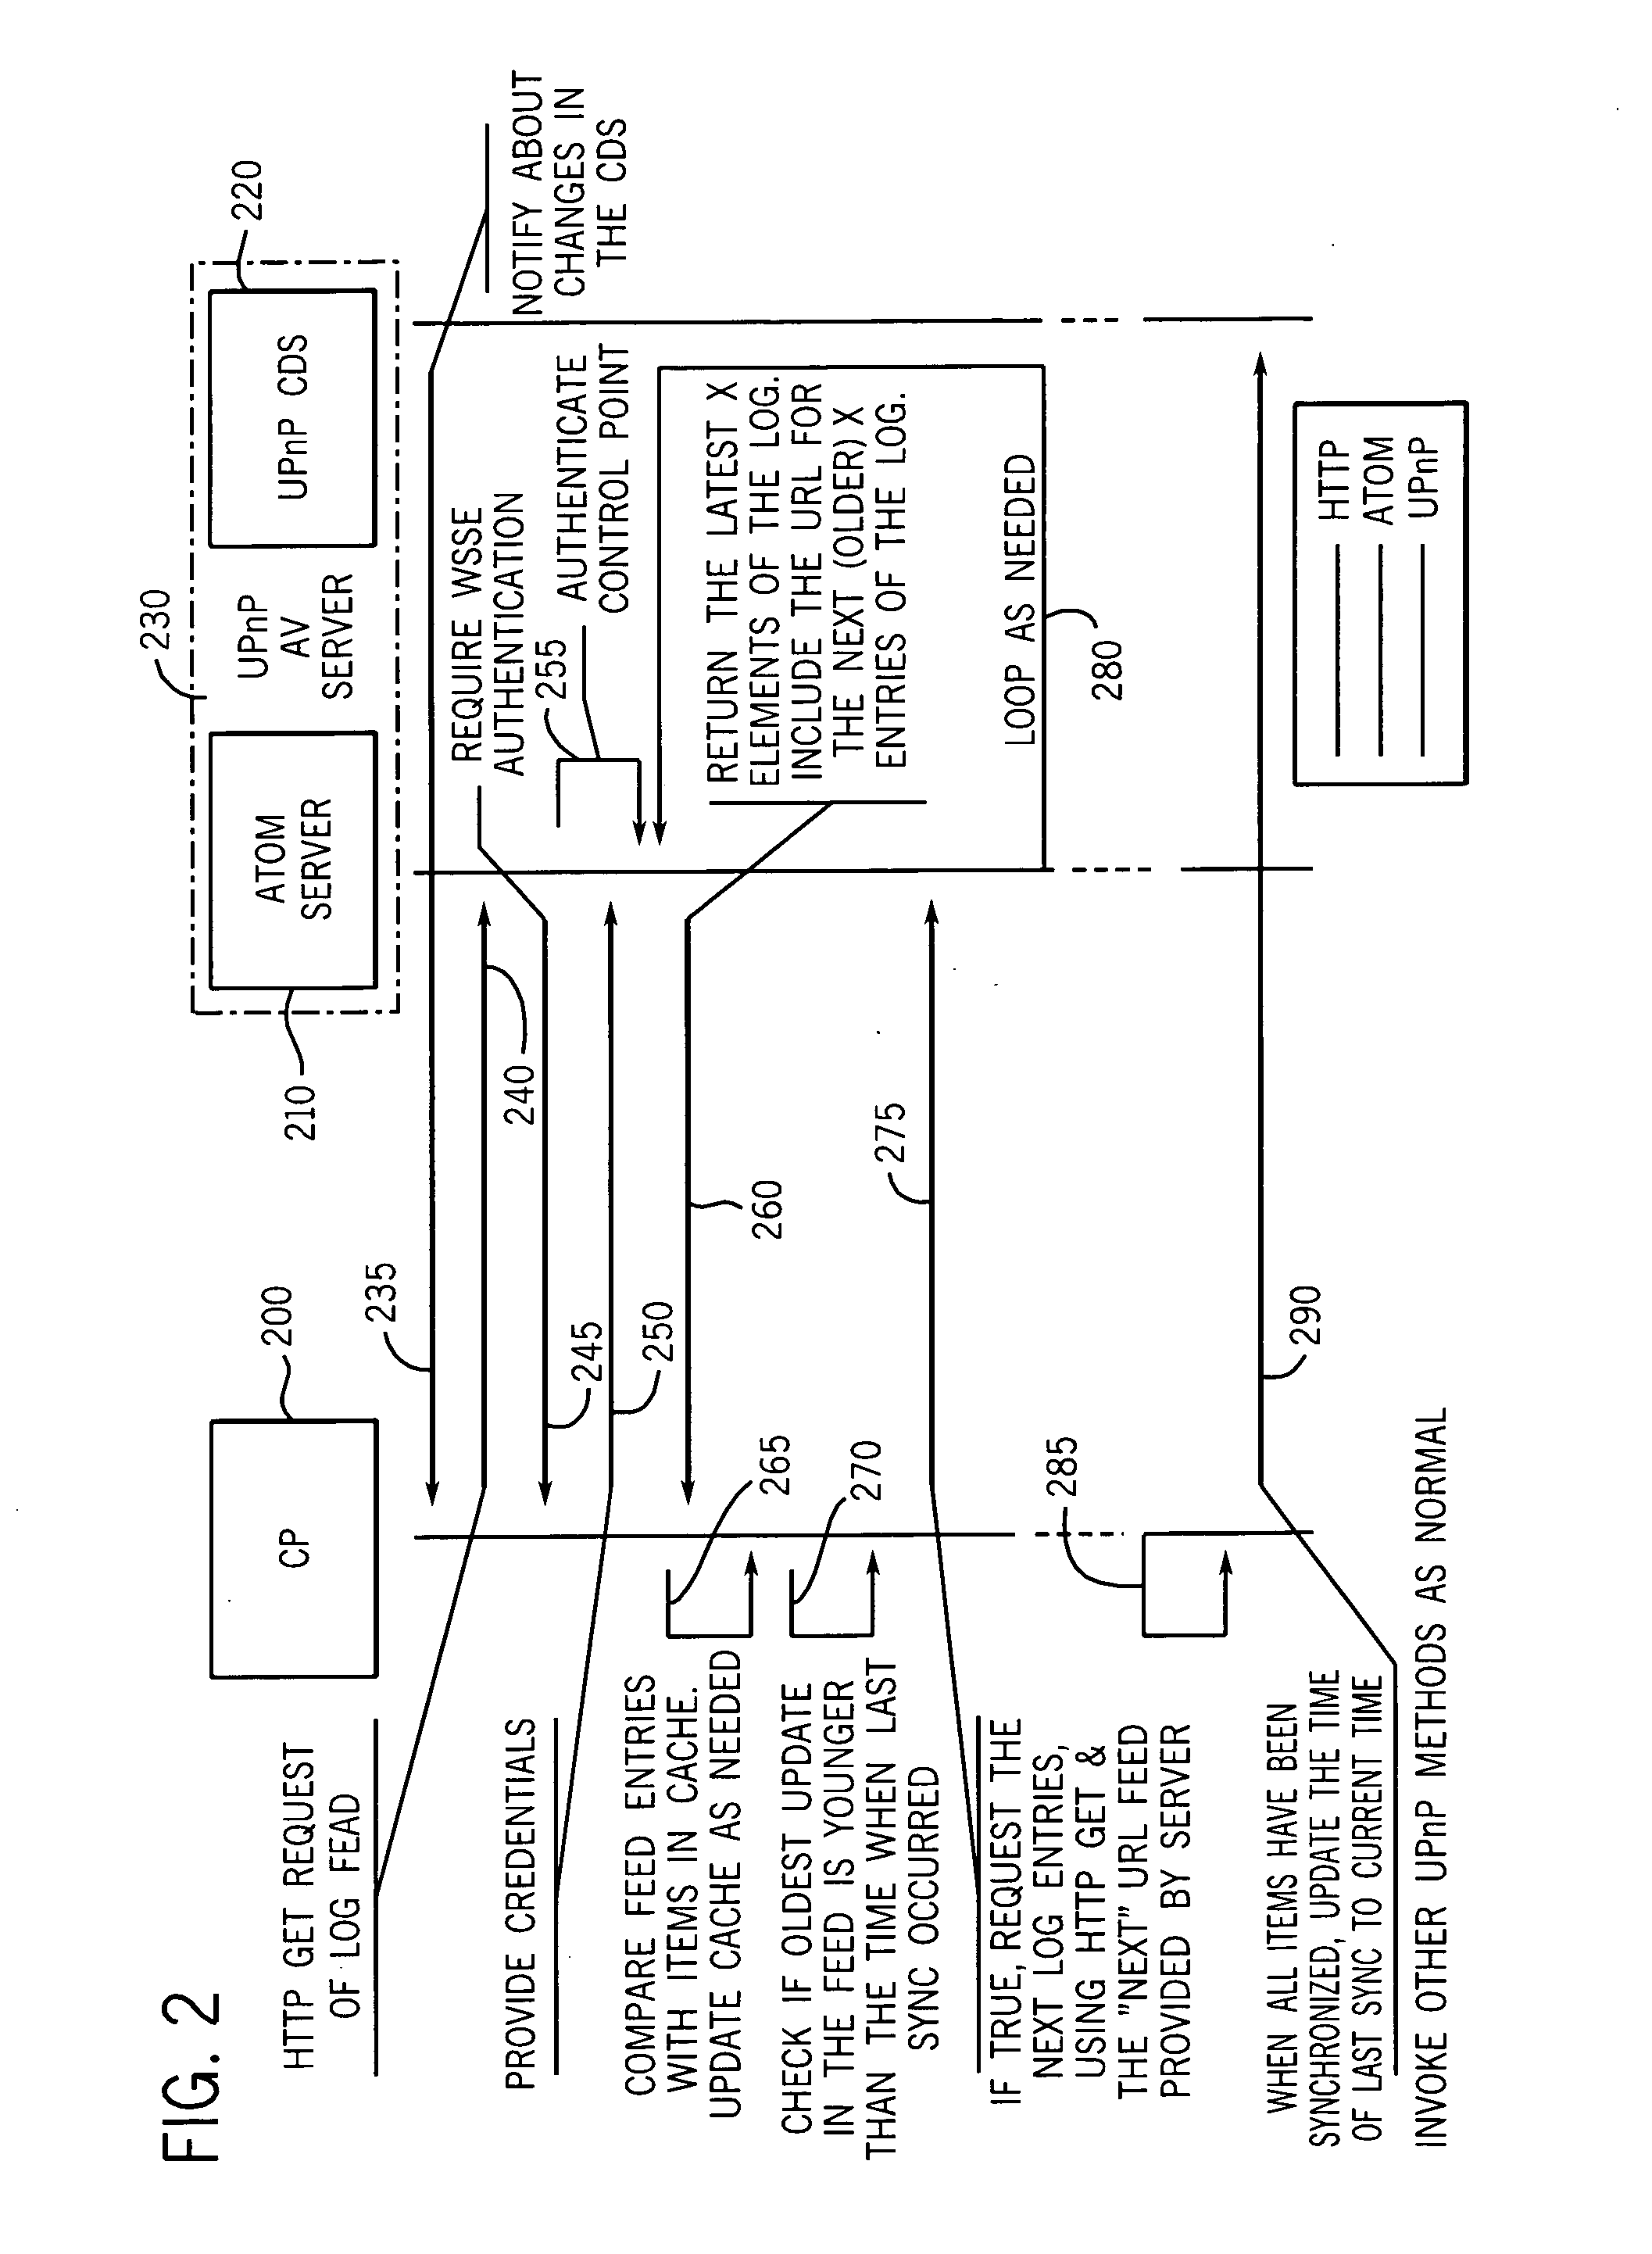 System and method for using web syndication feeds as a change log for synchronization in a UPnP audio/video environment